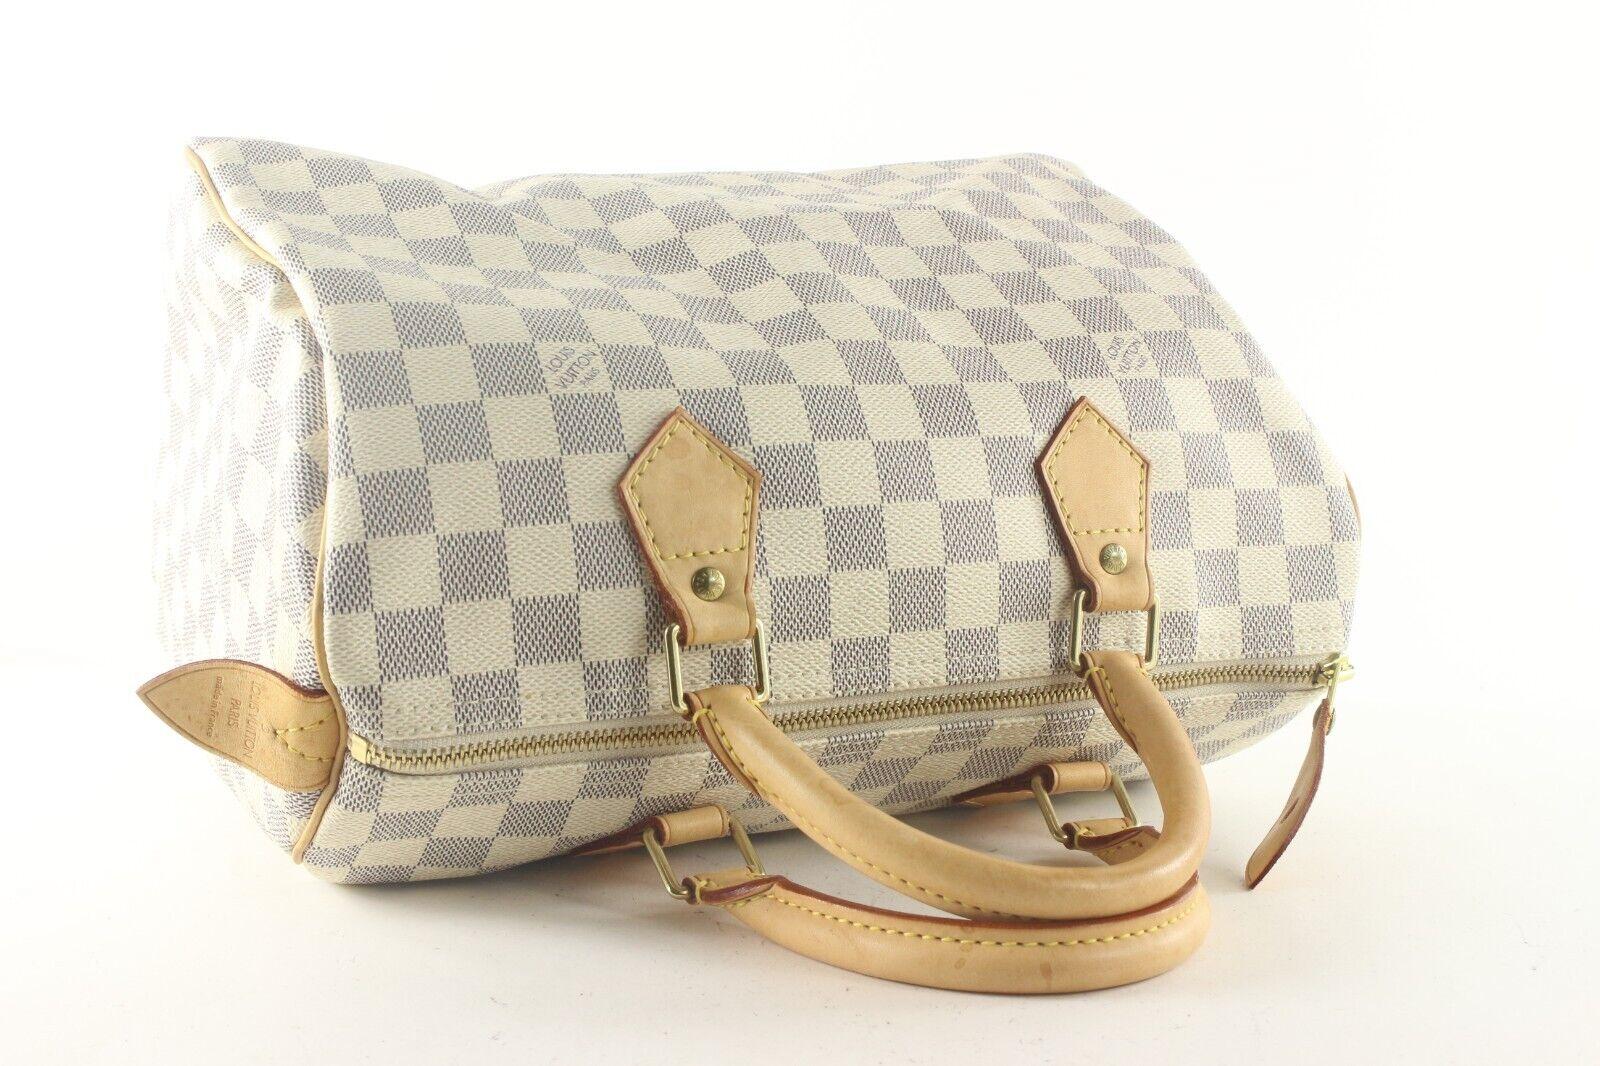 Louis Vuitton Damier Azur Canvas Speedy 30 Bag 7lv810k In Good Condition For Sale In Dix hills, NY